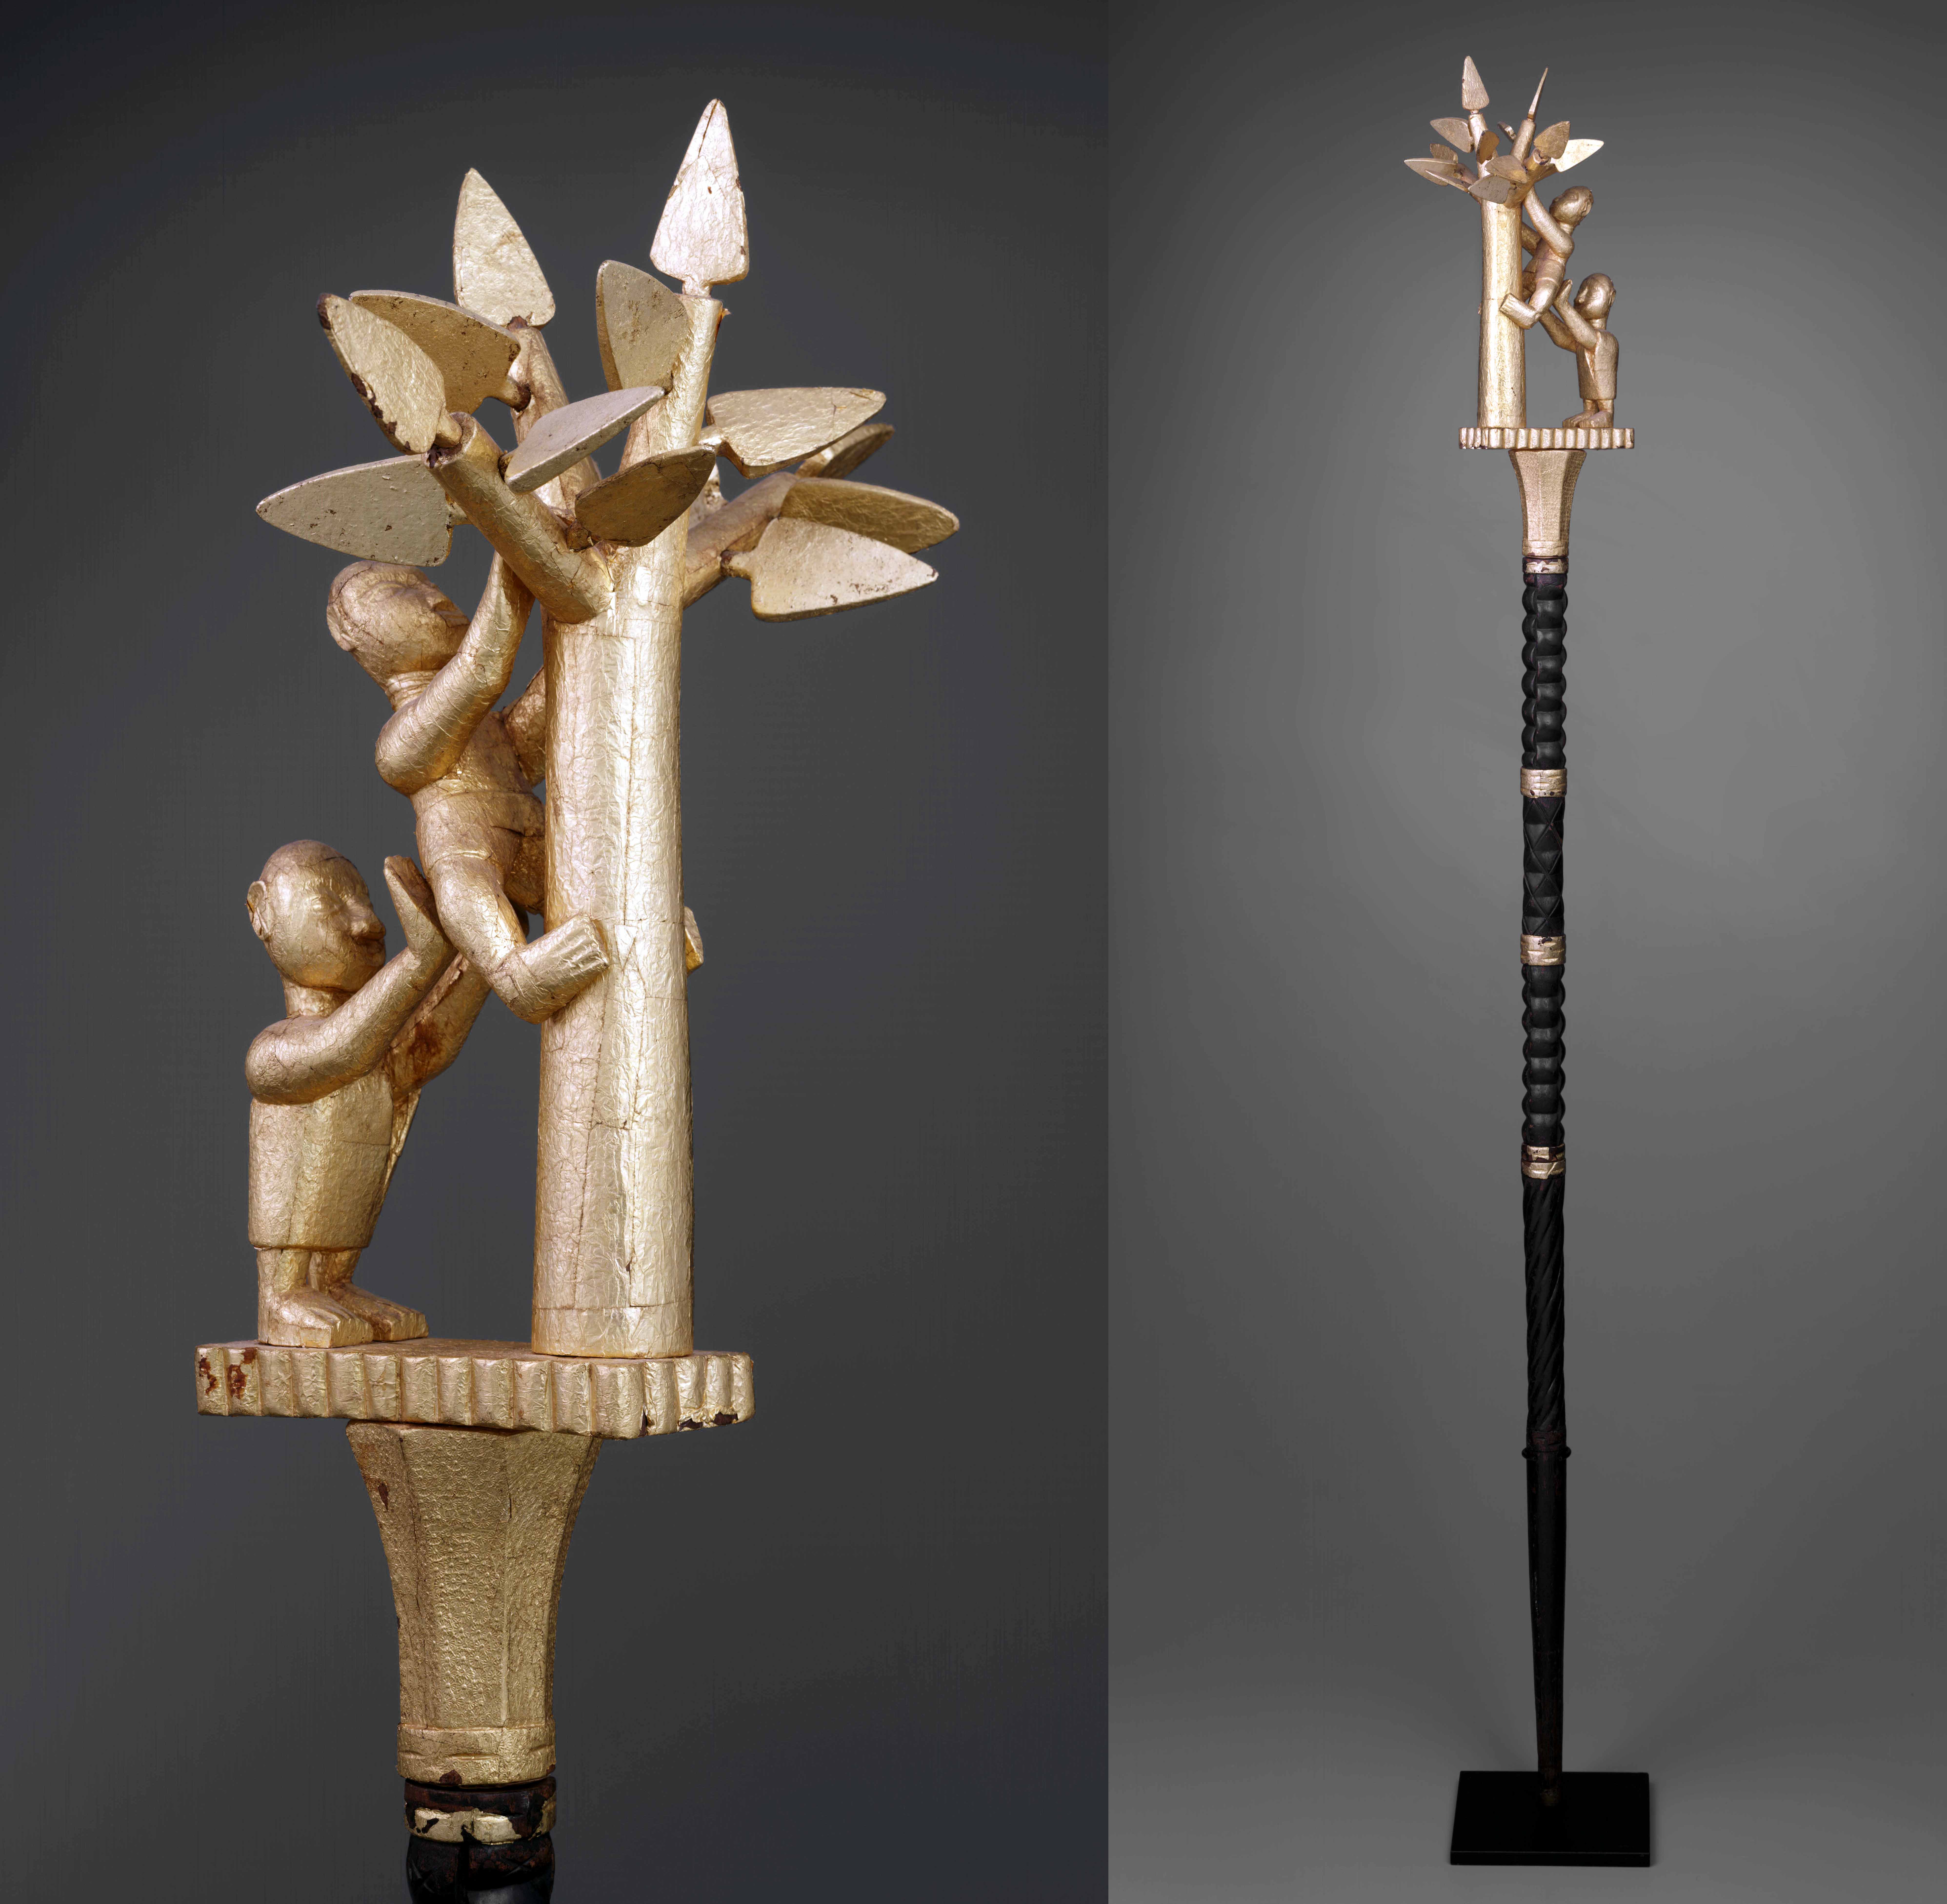 Linguist staff (okyeame poma), 1st half of the 20th century, Asante peoples, Ghana, wood and gold leaf, 1 m 60.02 cm x 25.083 cm x 20.32 cm (Dallas Museum of Art)